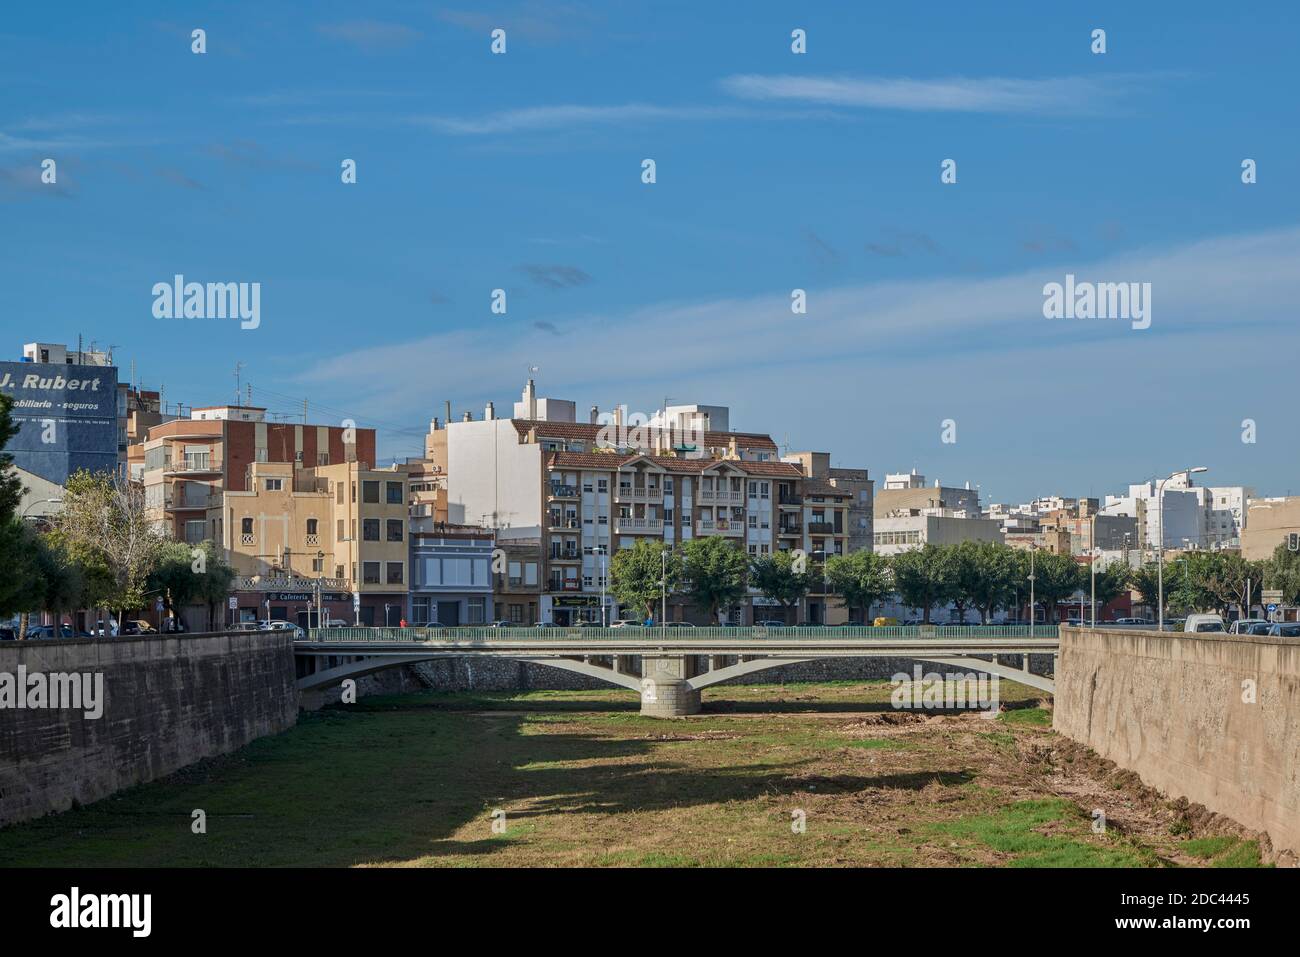 view of the bridge in the bed of the dry river Anna in the town of Burriana, Province of Castellon, Spain, Europe Stock Photo